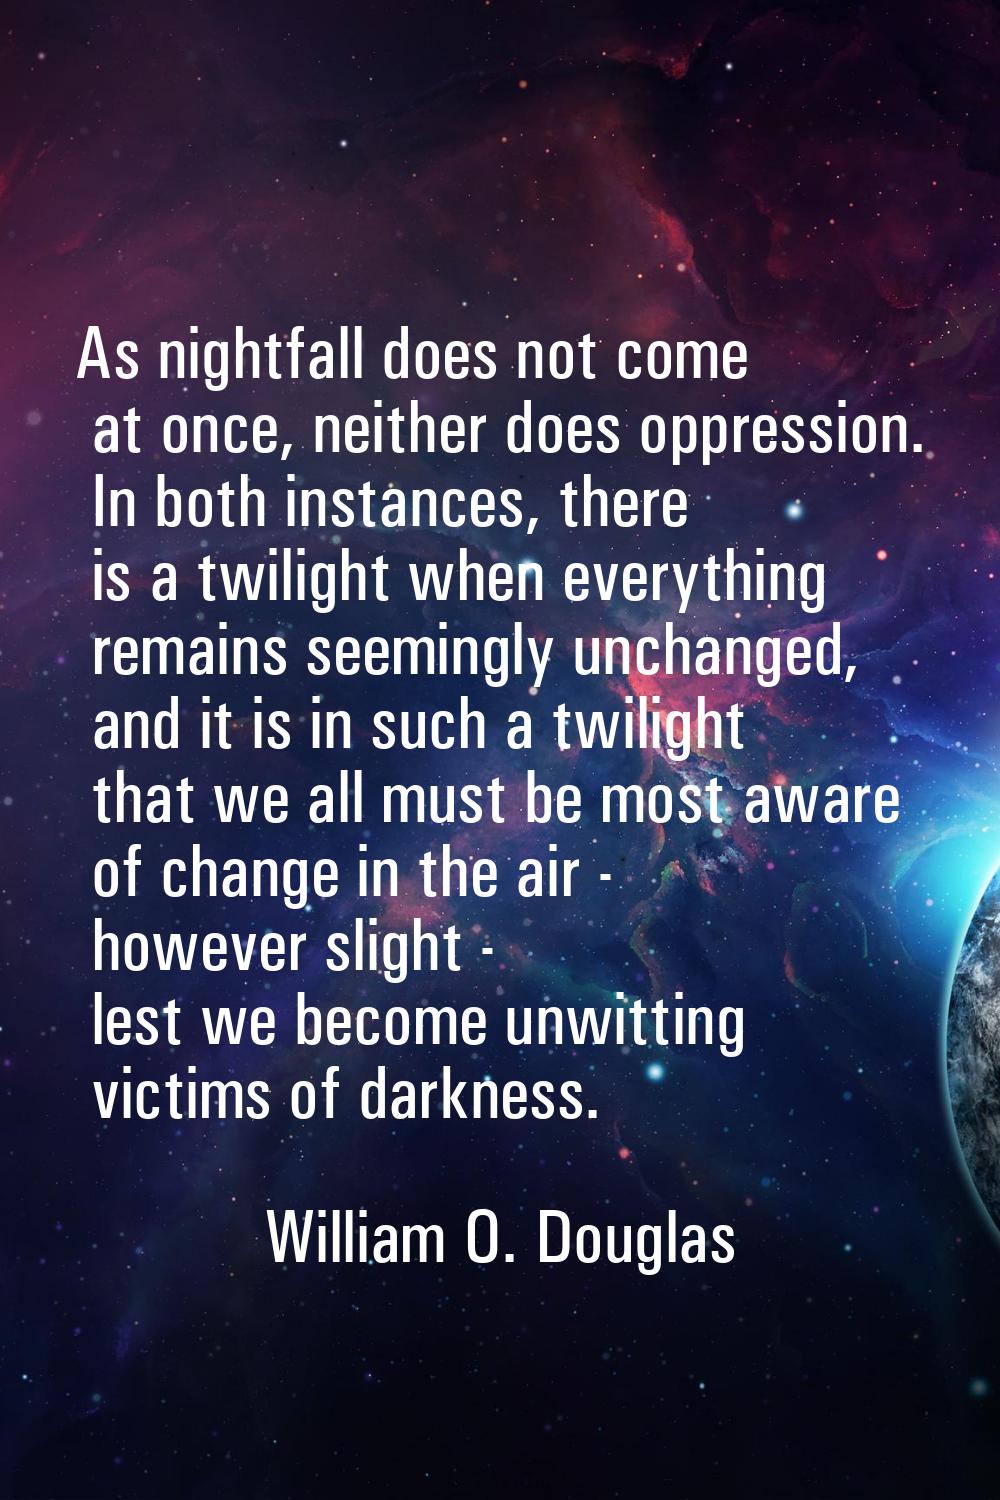 As nightfall does not come at once, neither does oppression. In both instances, there is a twilight